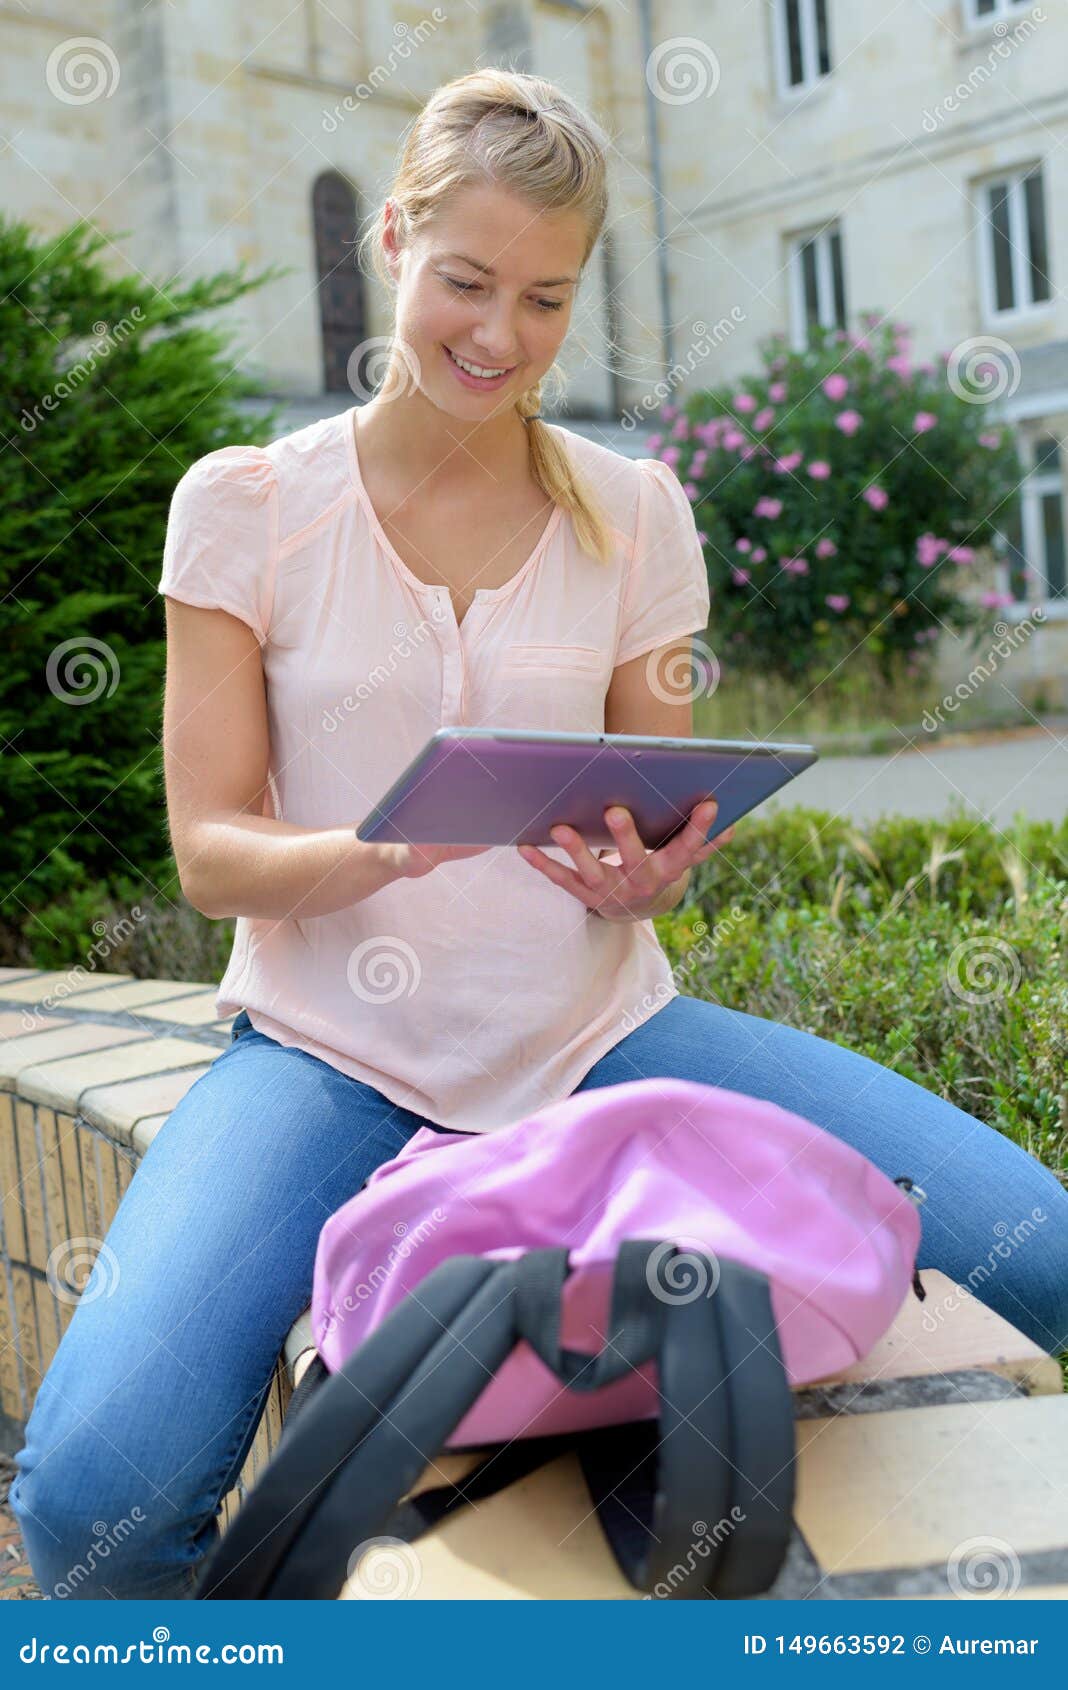 serious student girl using tablet outdoors